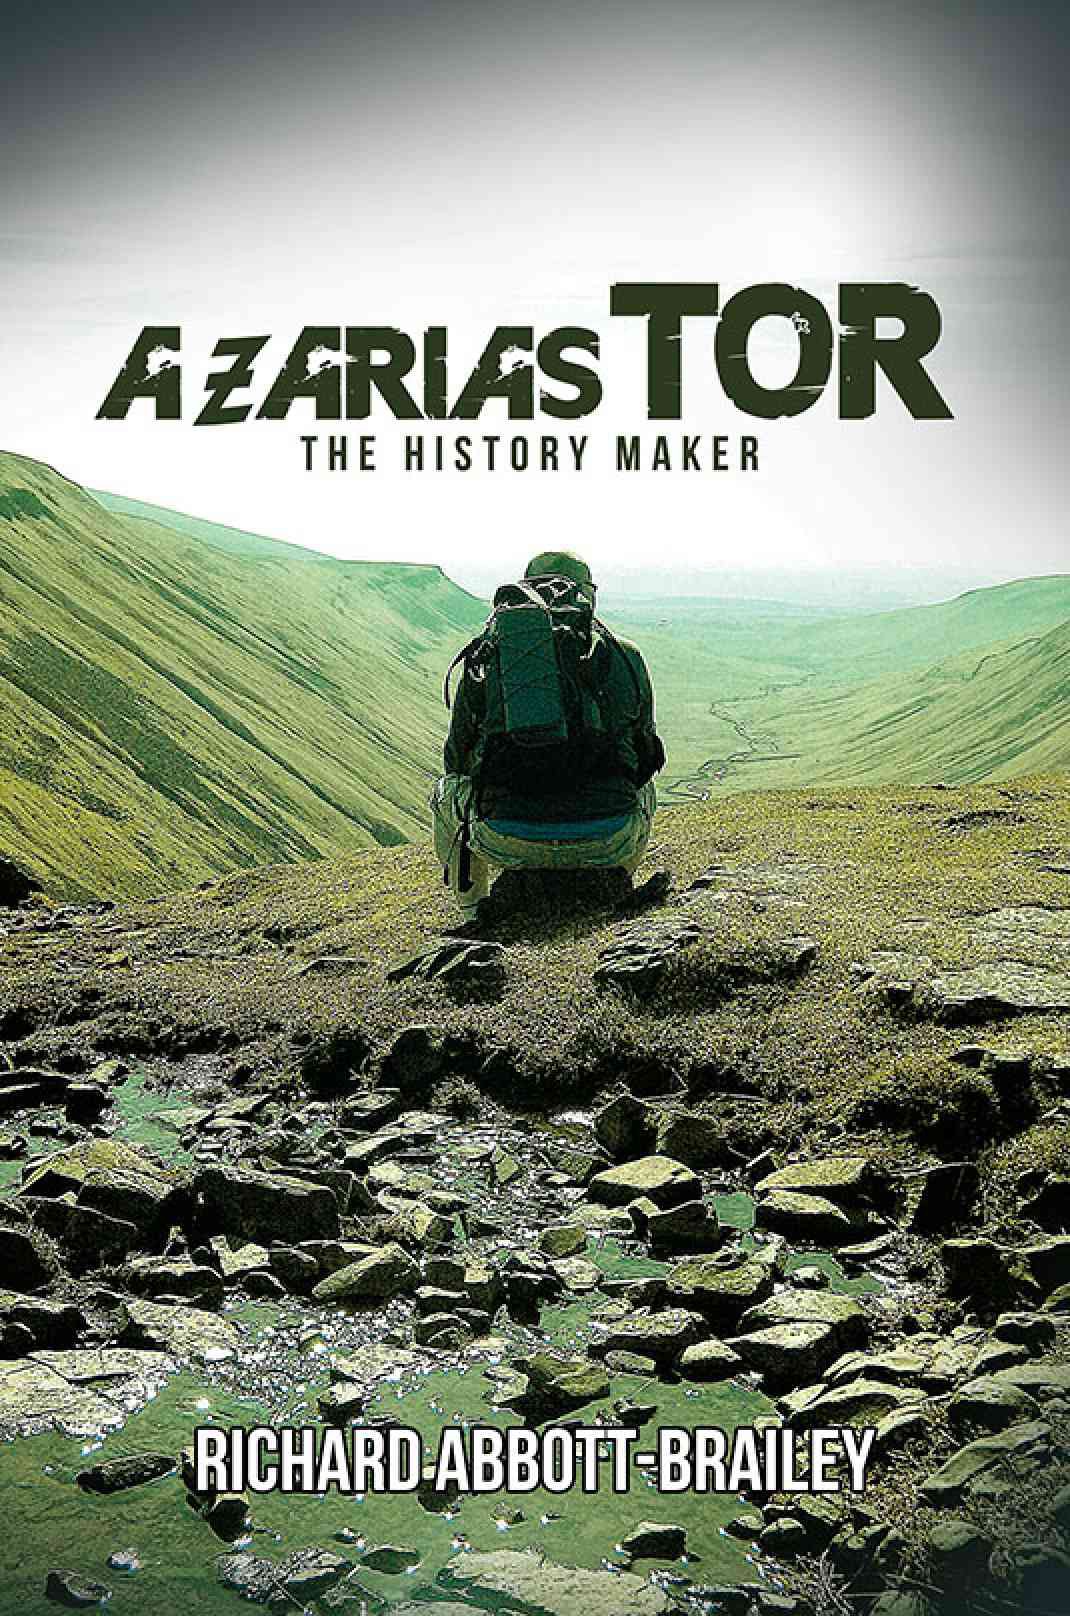 Discover the possibilities of time with ‘Azarias Tor: The History Maker’